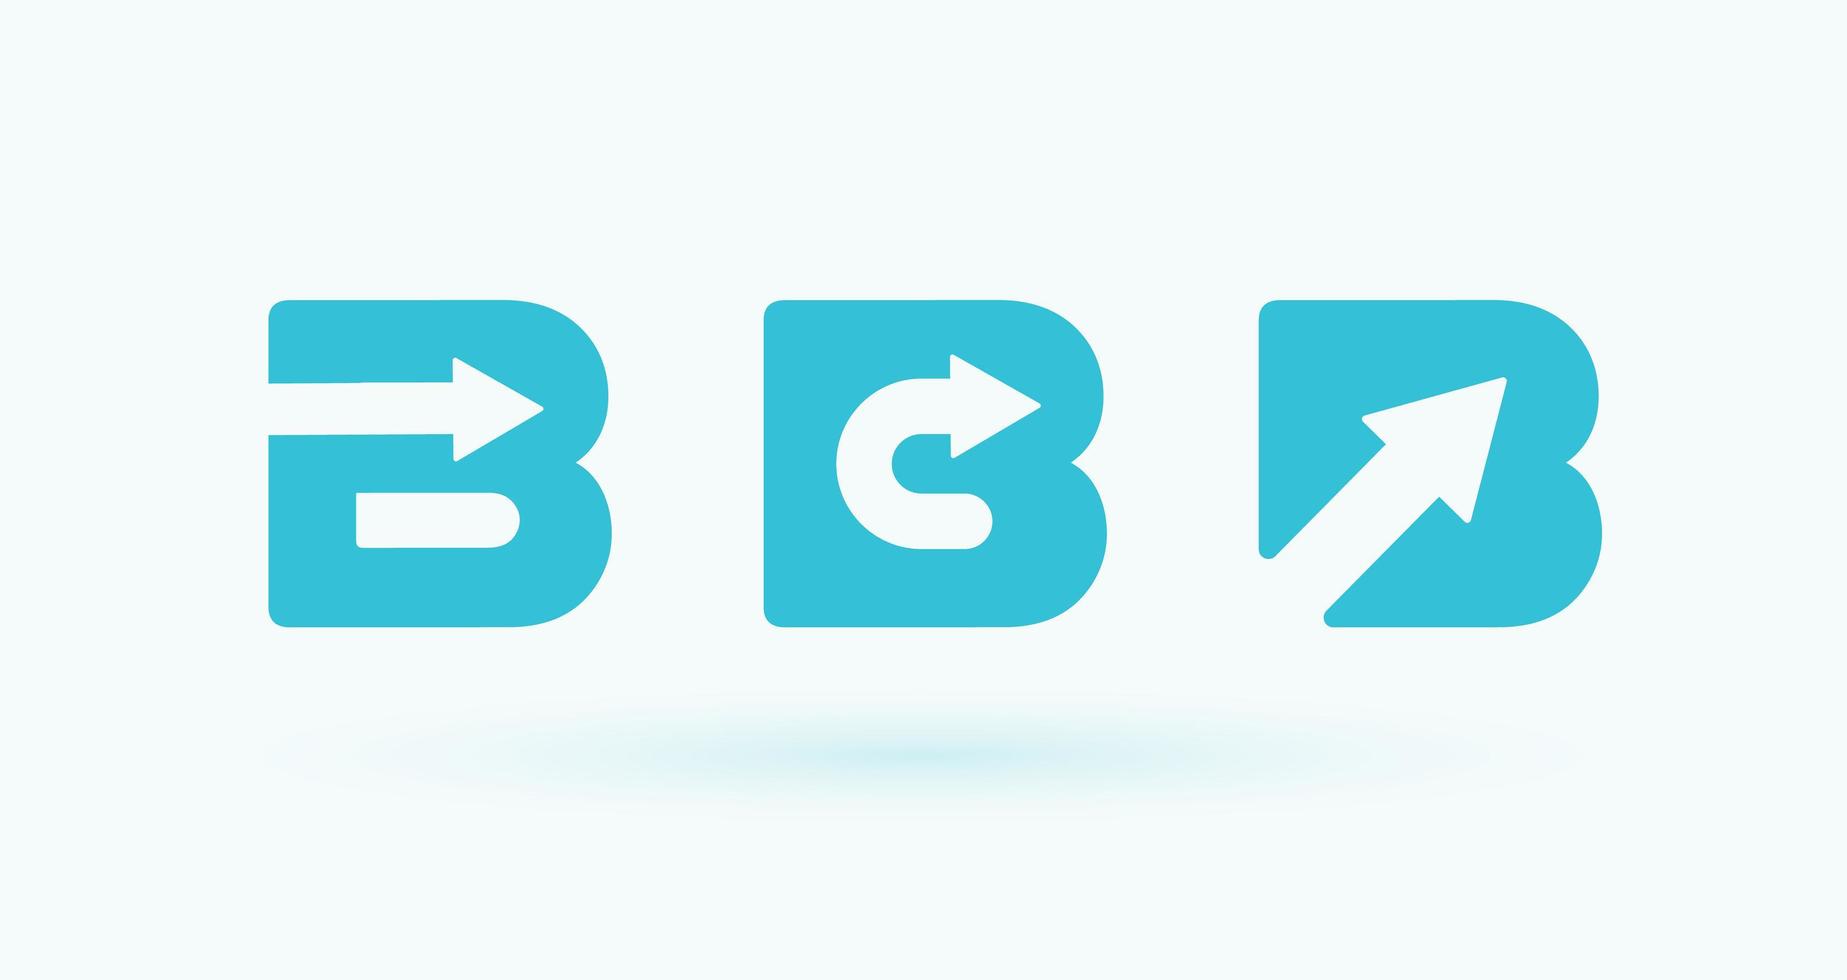 Letter B set with arrow inside, flat cartoon style vector logo concept. Business button, isolated icon on white background. Banking symbol for business and developing startup